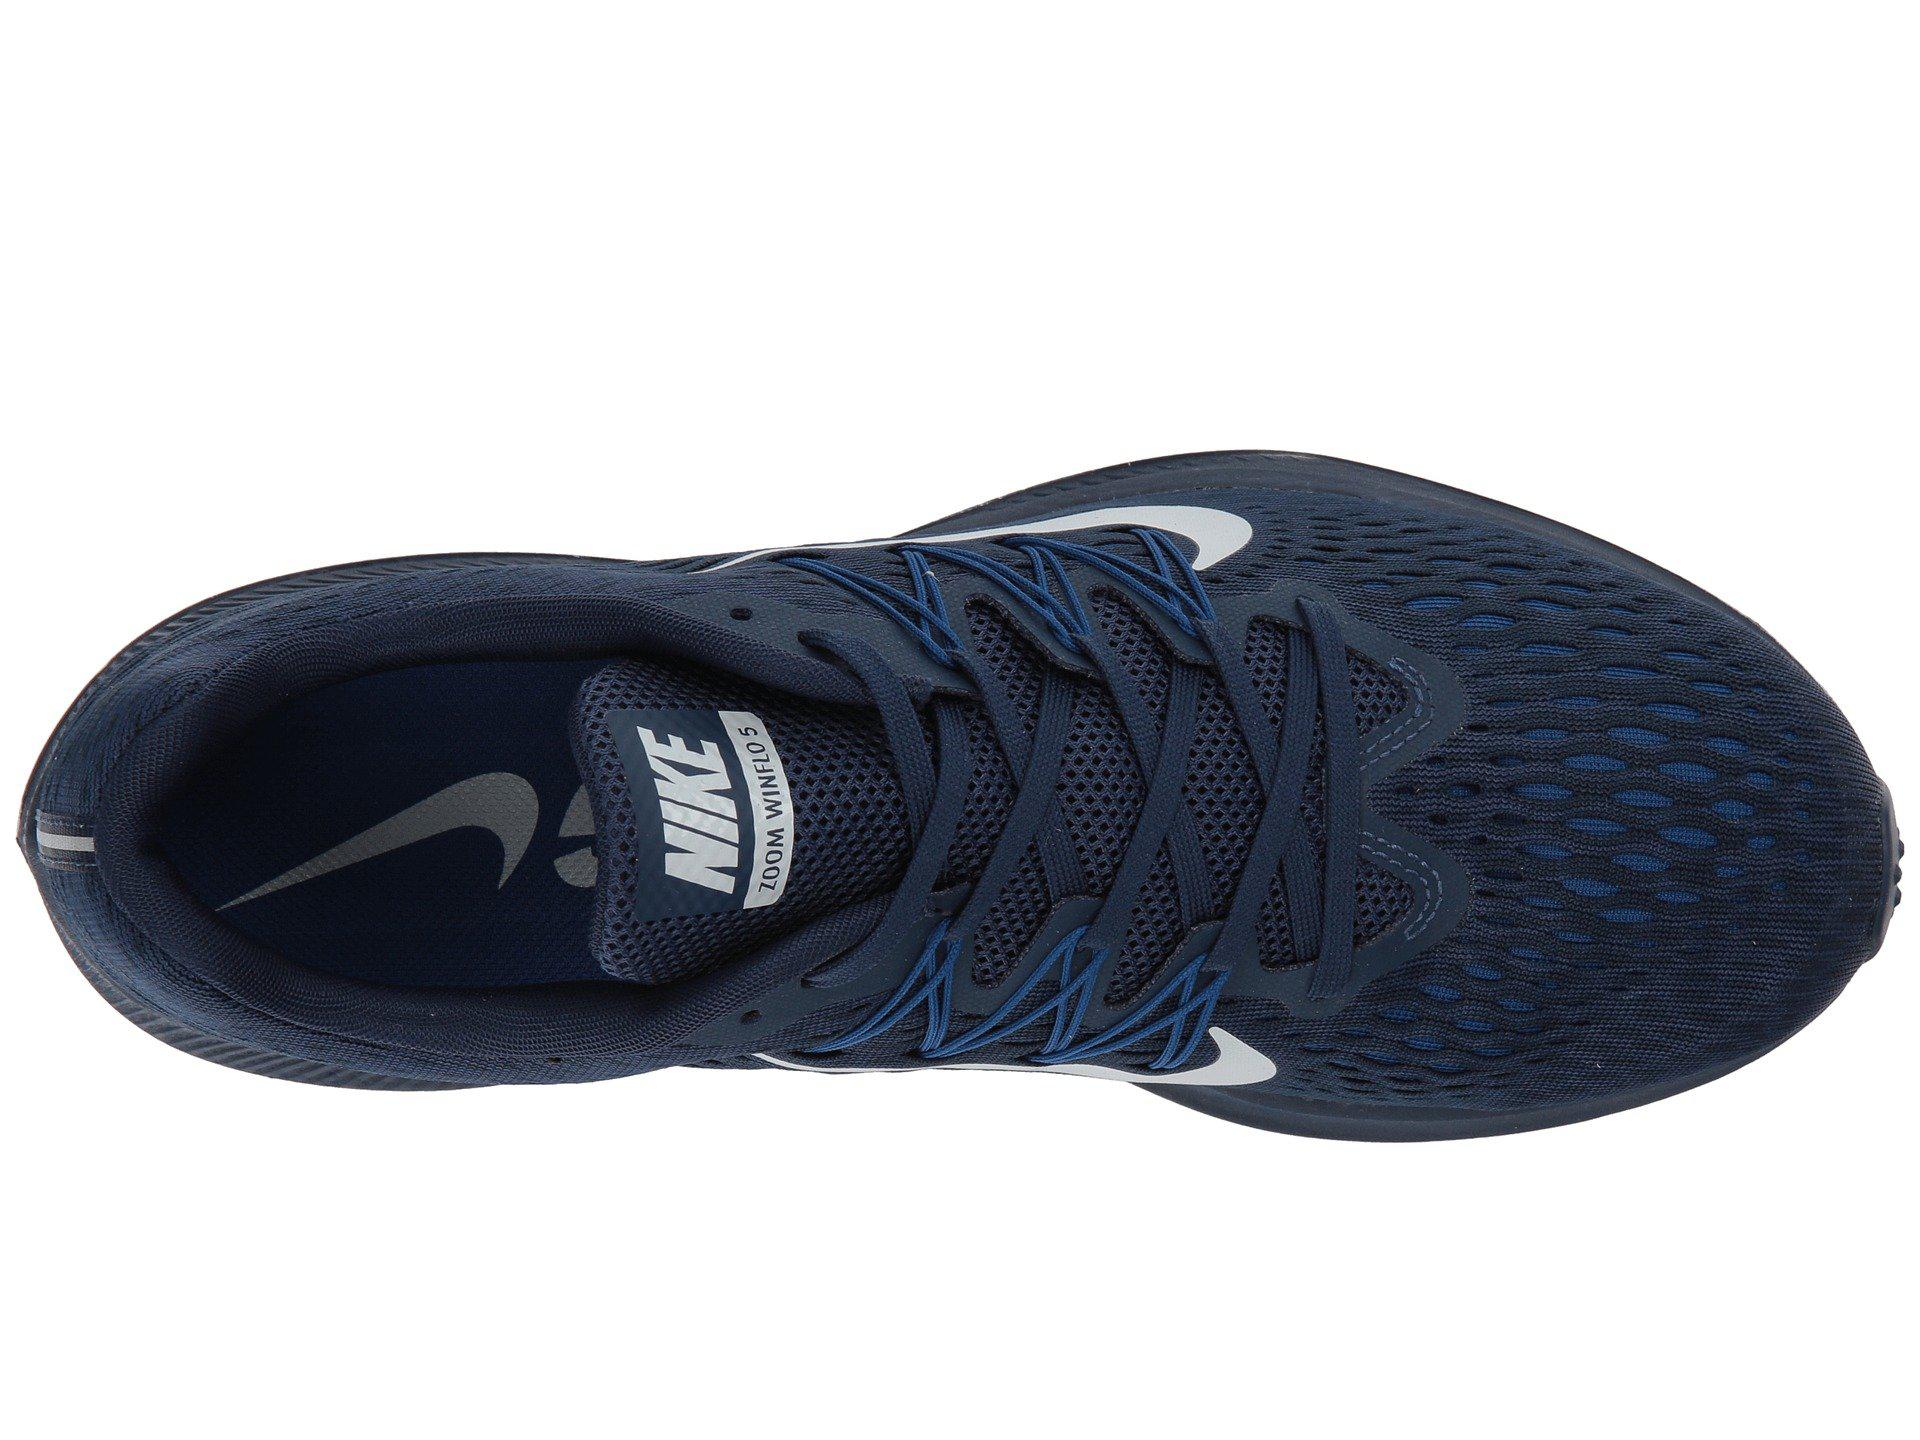 Nike Air Zoom Winflo 5 (midnight Navy/pure Platinum) Running Shoes in Blue  for Men | Lyst